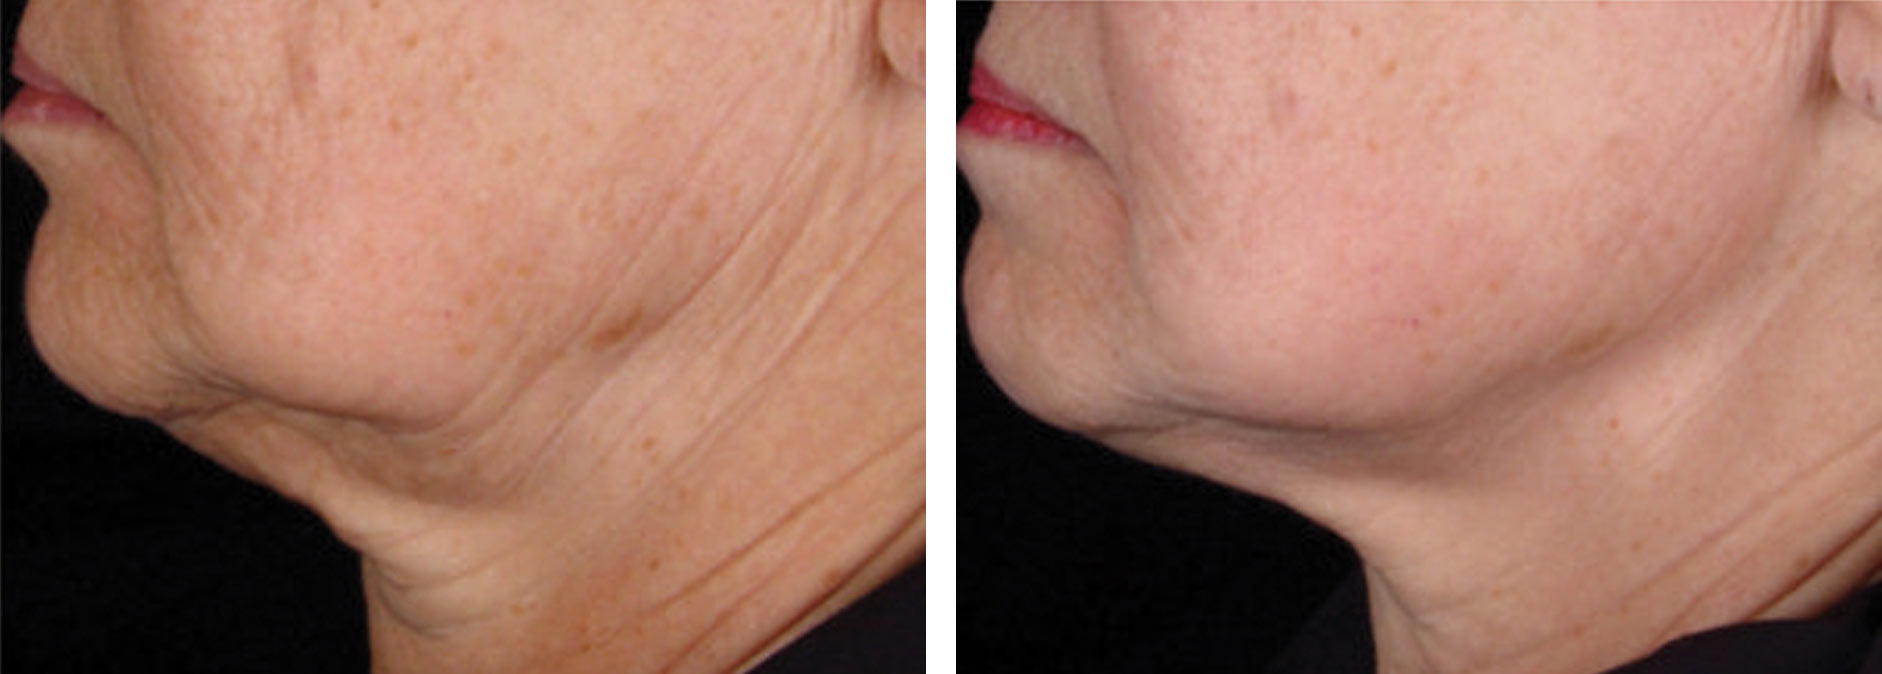 Intensif Microneedling with Radio Frequency Before and After 2